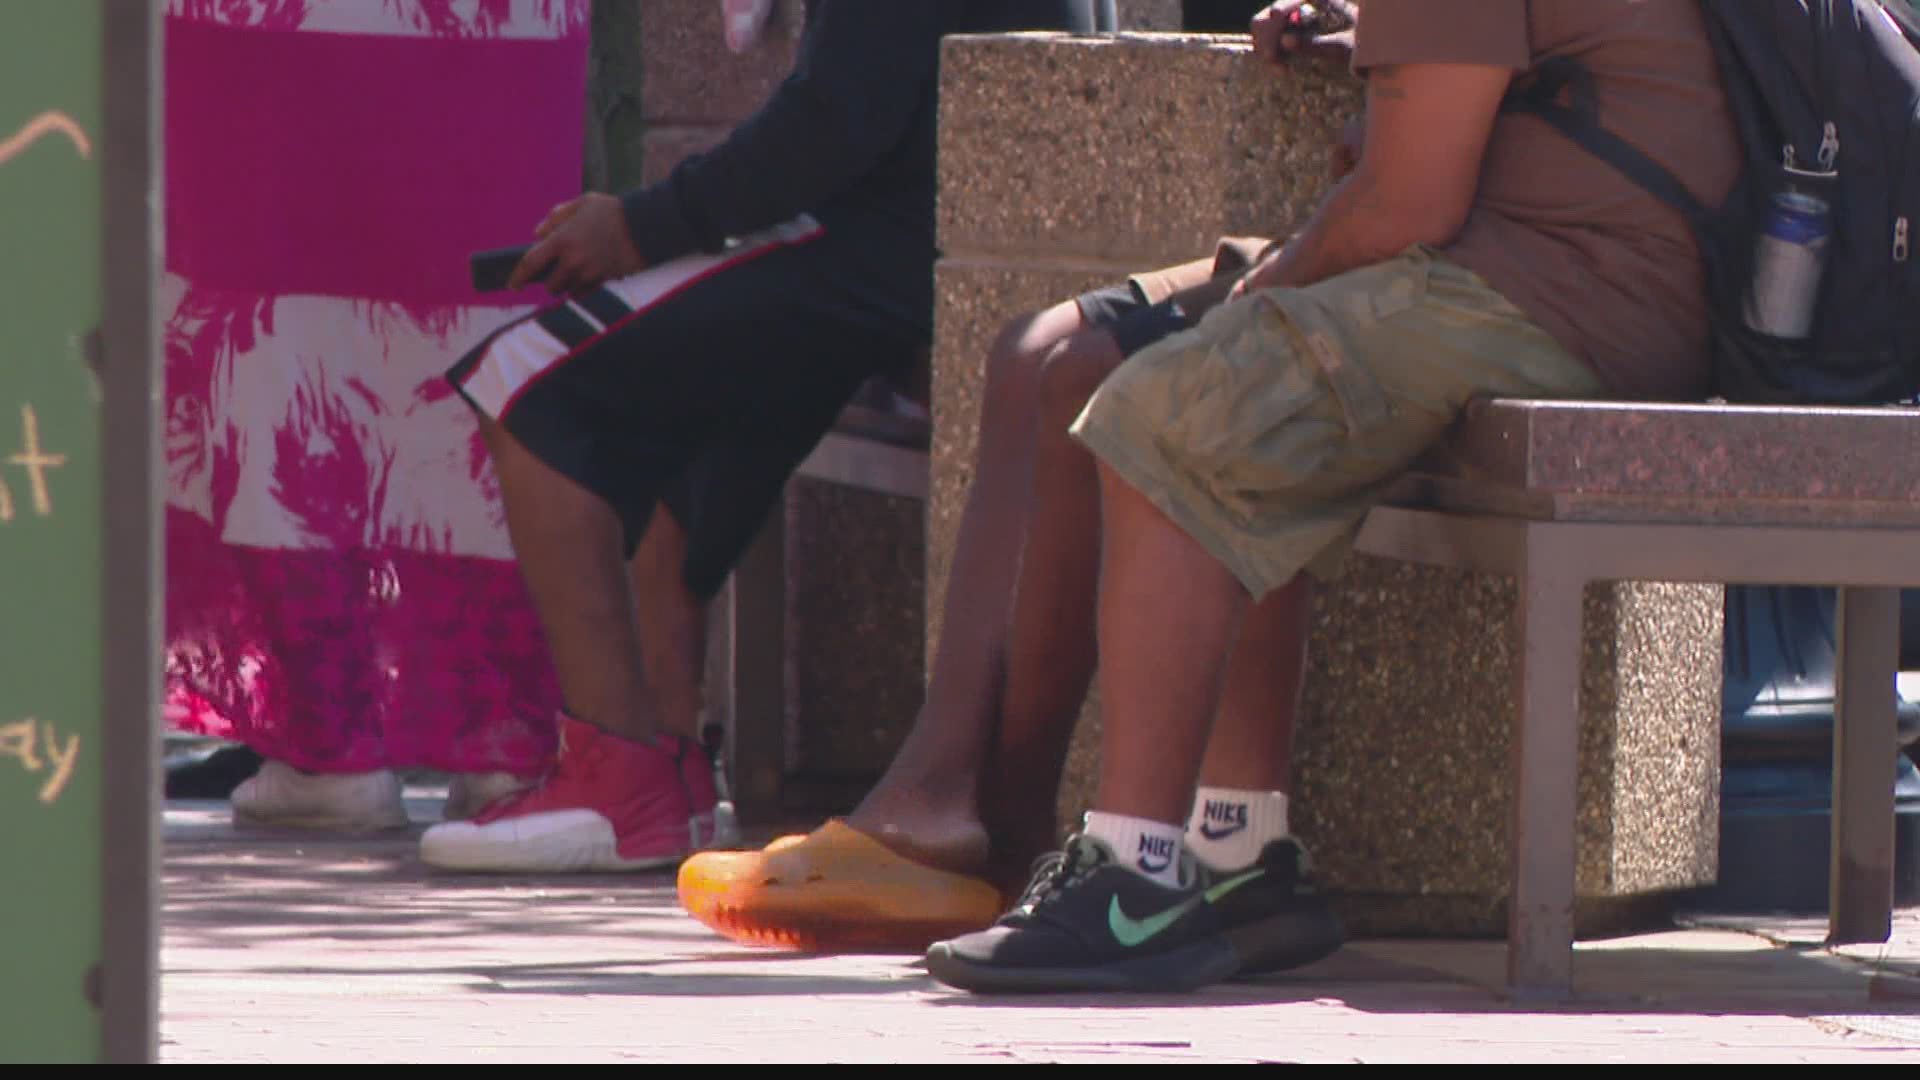 The homeless population has become more visible downtown with shelters being closed during the pandemic.